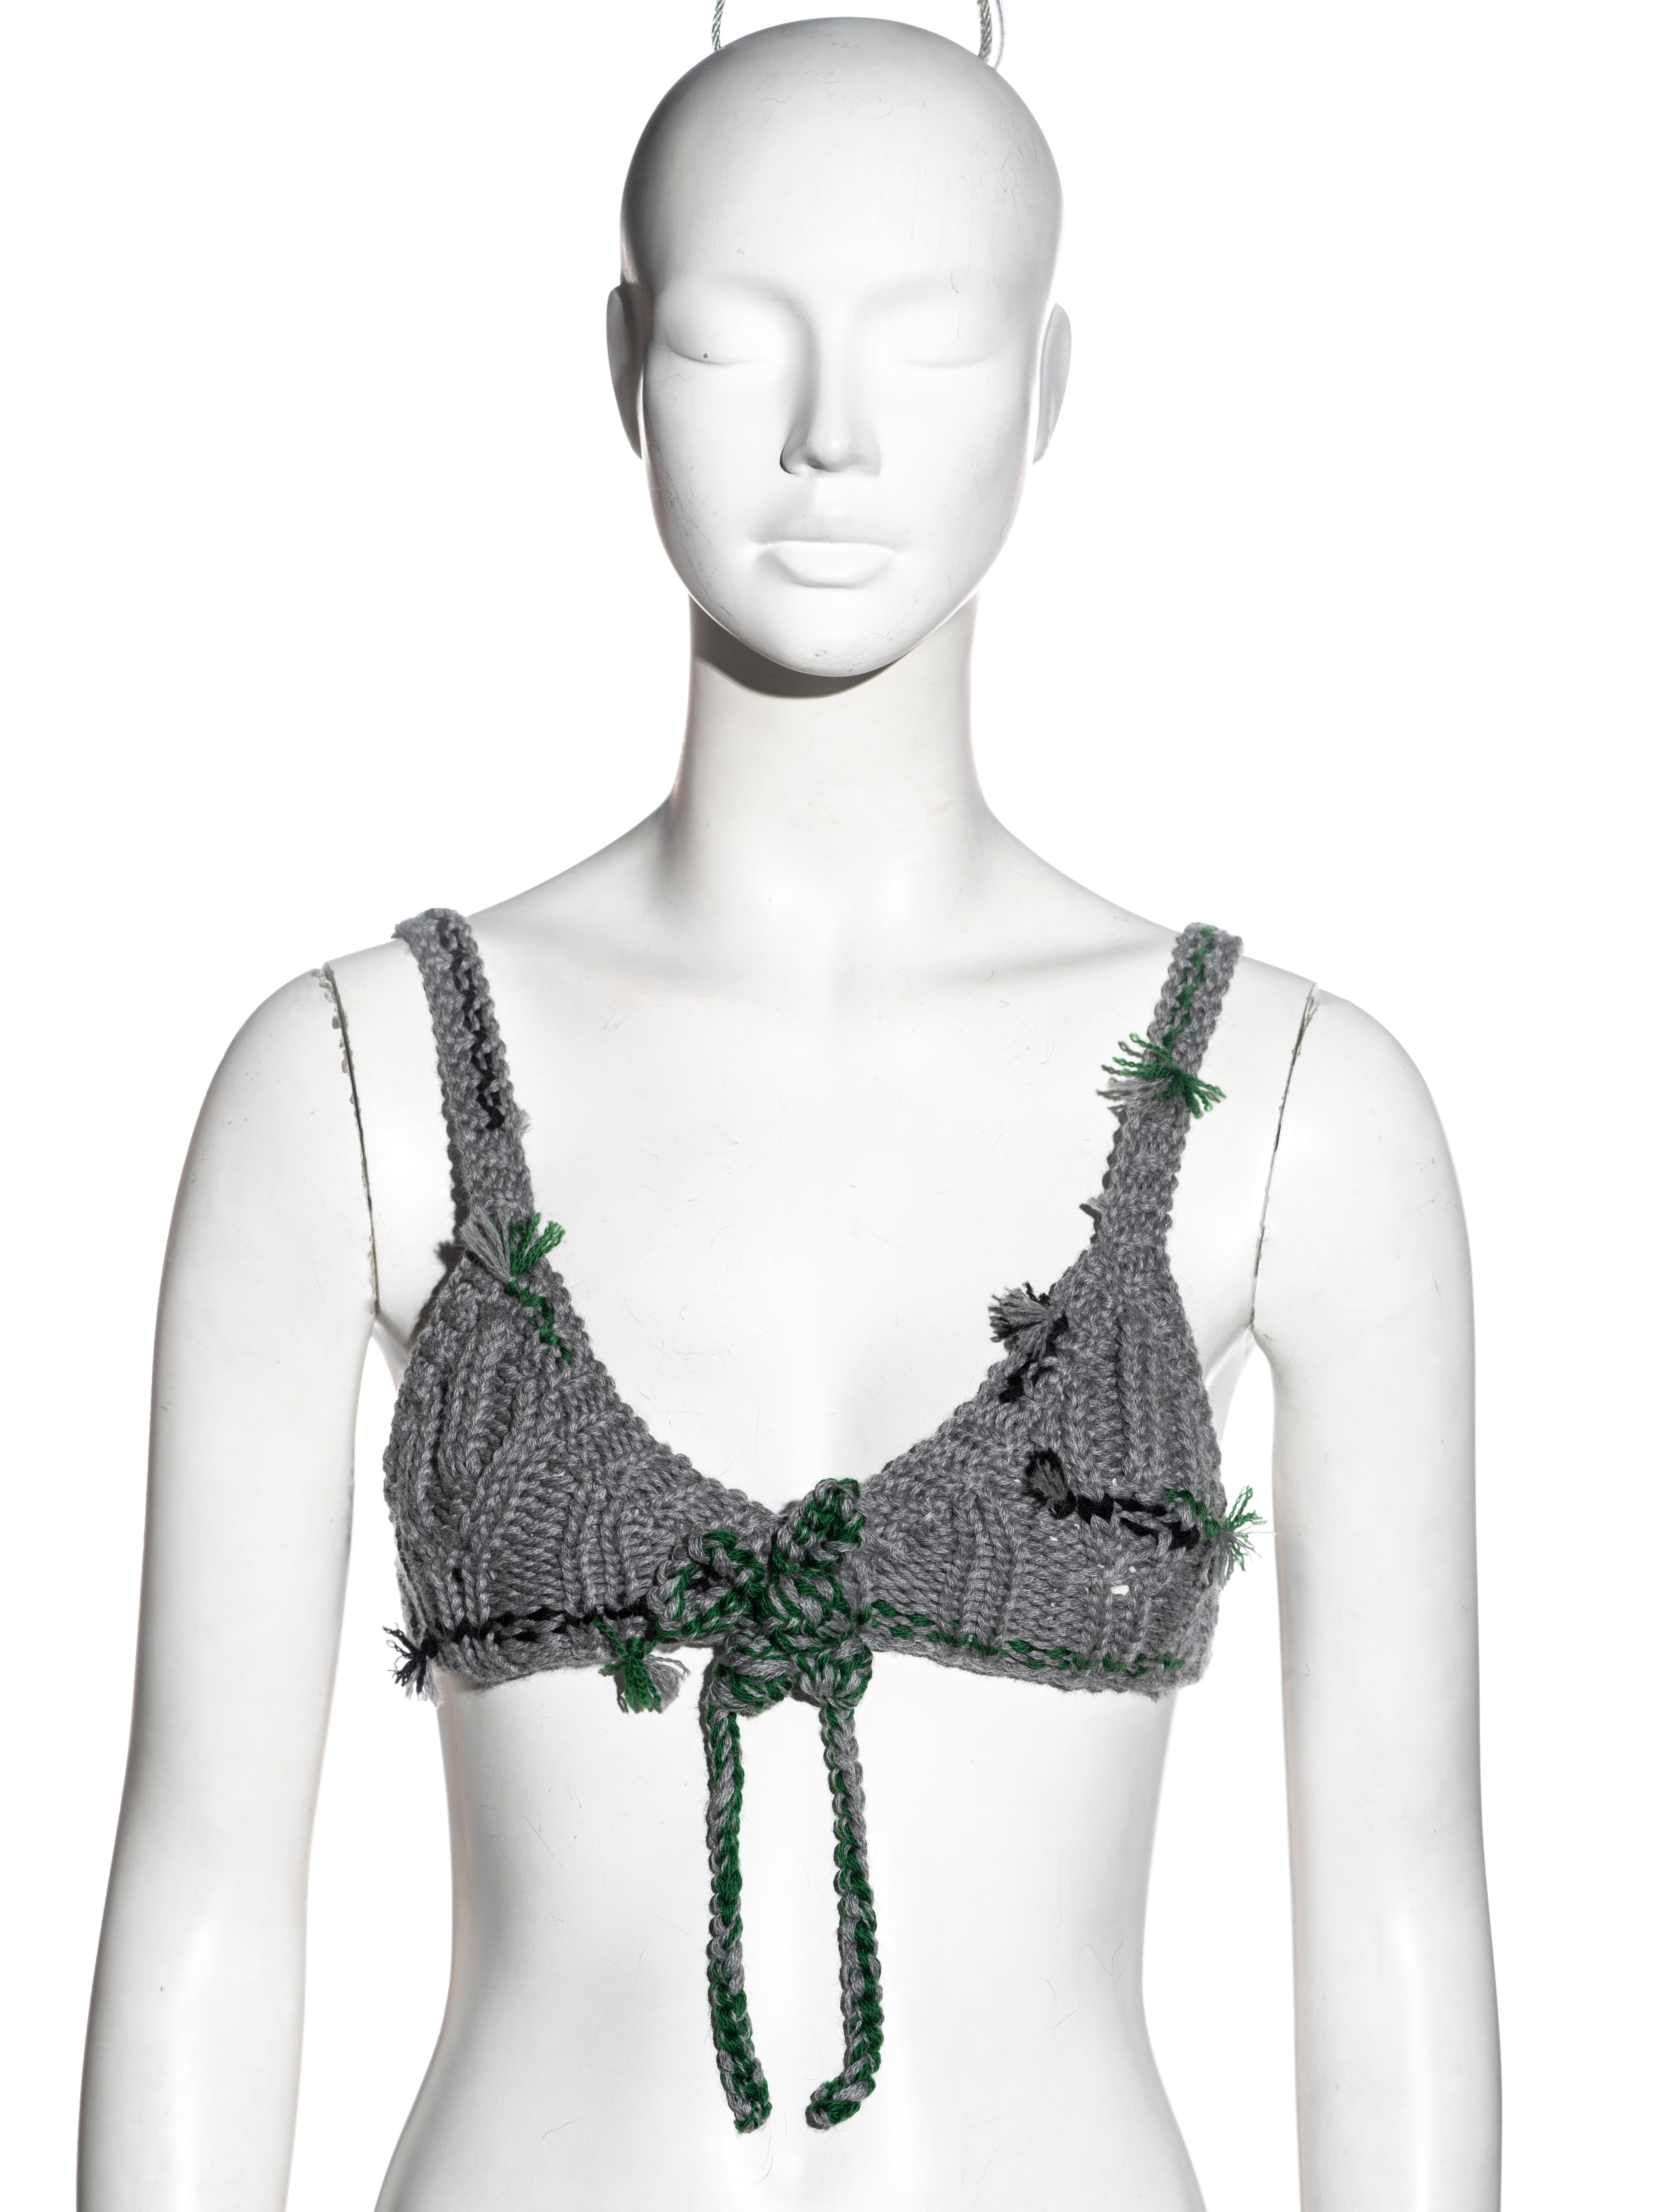 ▪ Prada knitted bra top
▪ Designed by Miuccia Prada
▪ Crocheted grey, green and black pure new wool 
▪ Bow detail at the centre-front 
▪ Snap-button closures at the centre-back
▪ IT 38 - FR 34 - UK 6 
▪ Fall-Winter 2017
▪ 100% Pure New Wool
▪ Made